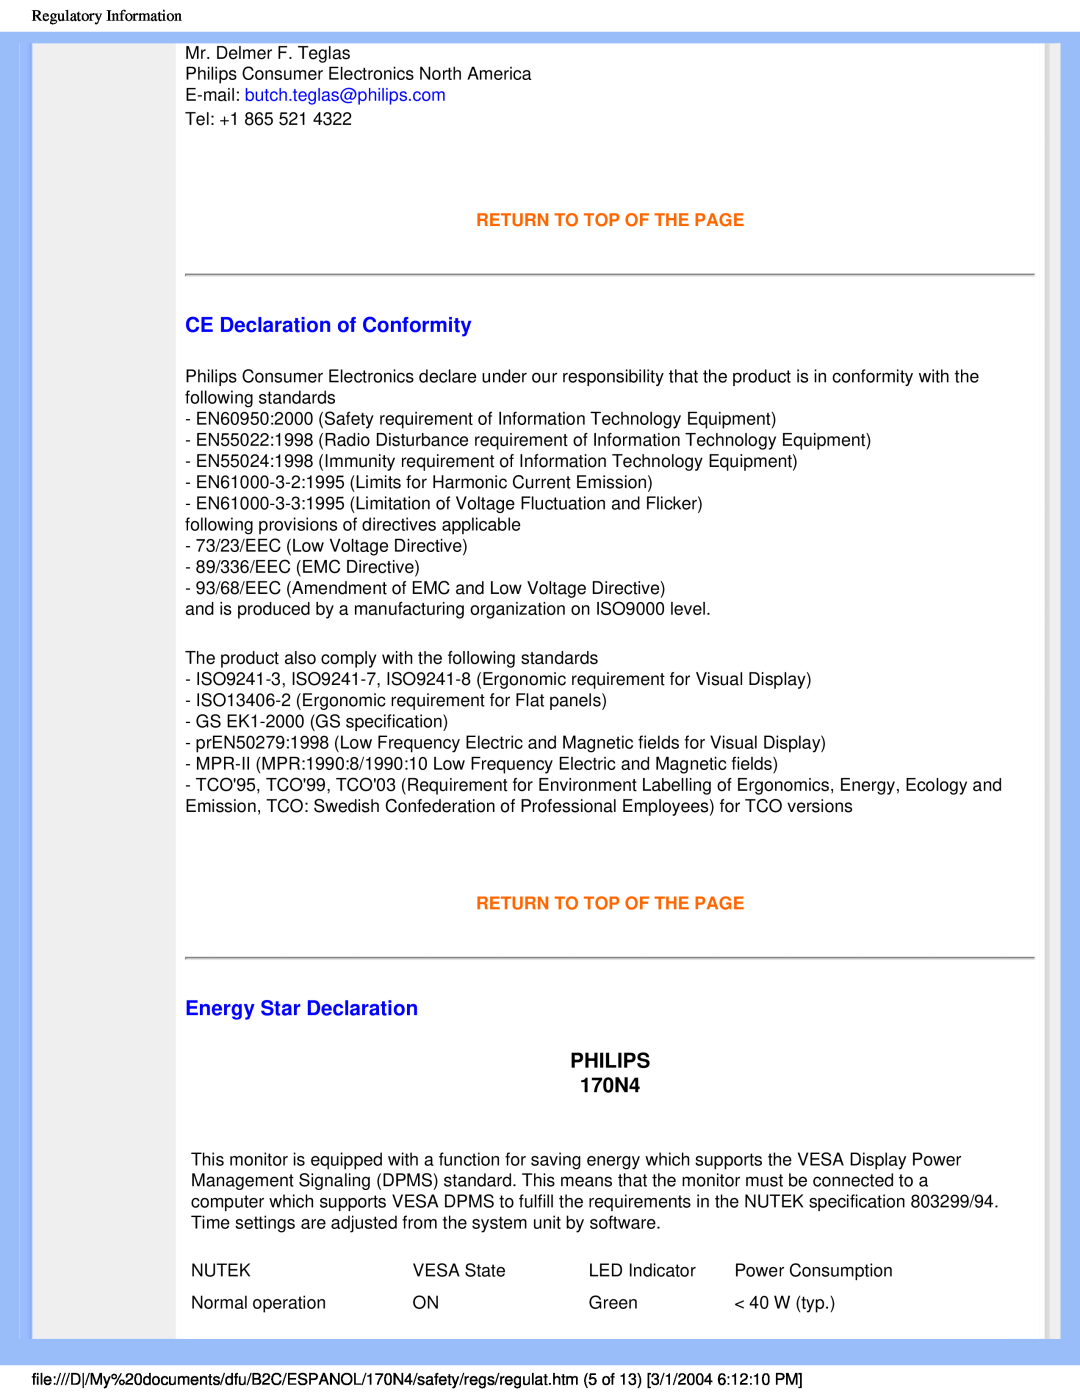 Philips user manual CE Declaration of Conformity, Energy Star Declaration, PHILIPS 170N4, Return To Top Of The Page 